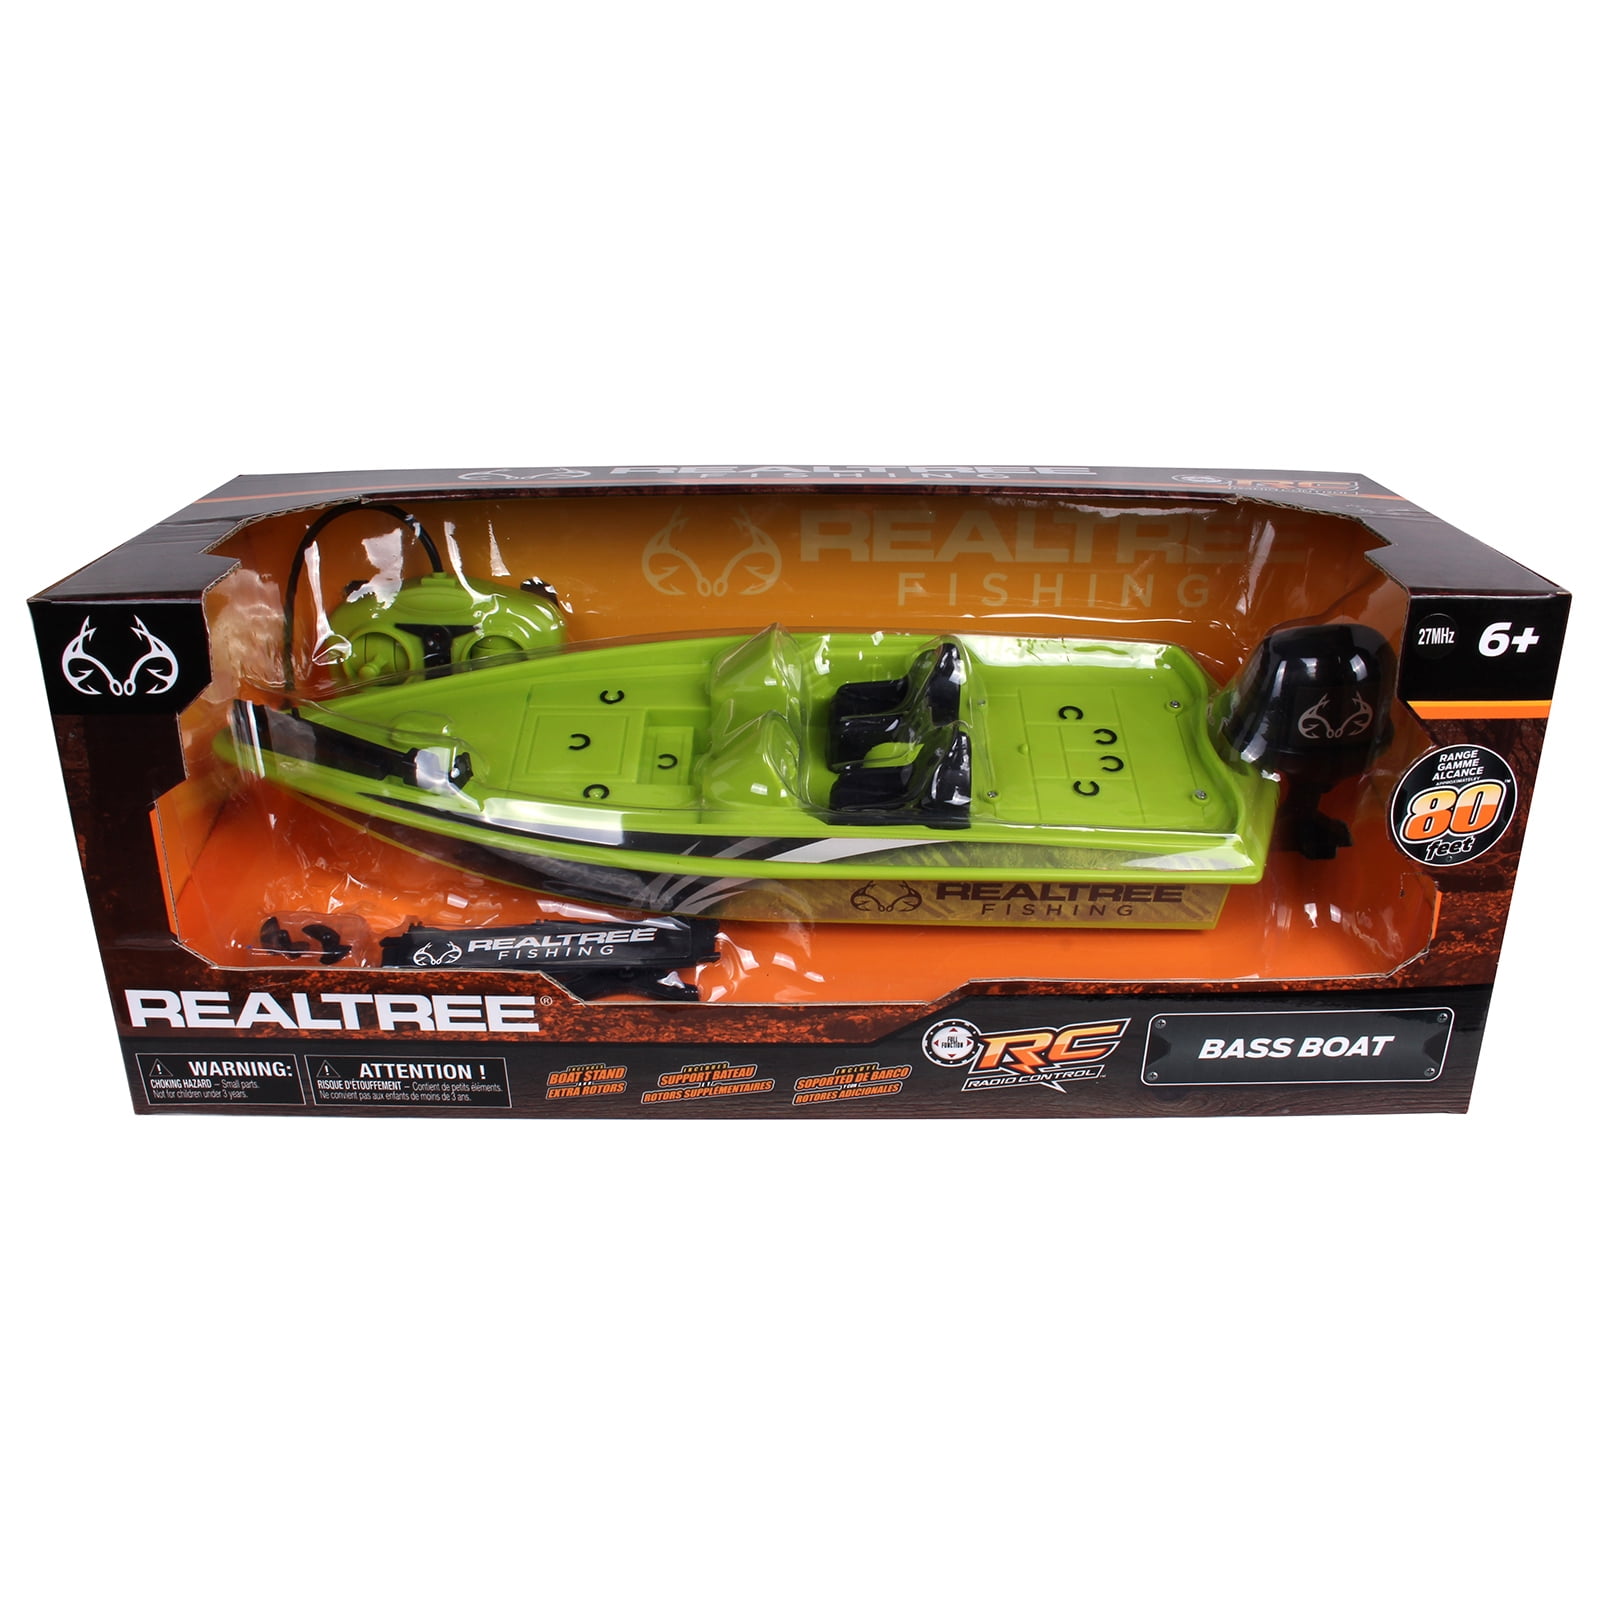 Full Function Remote Control Bass Boat 